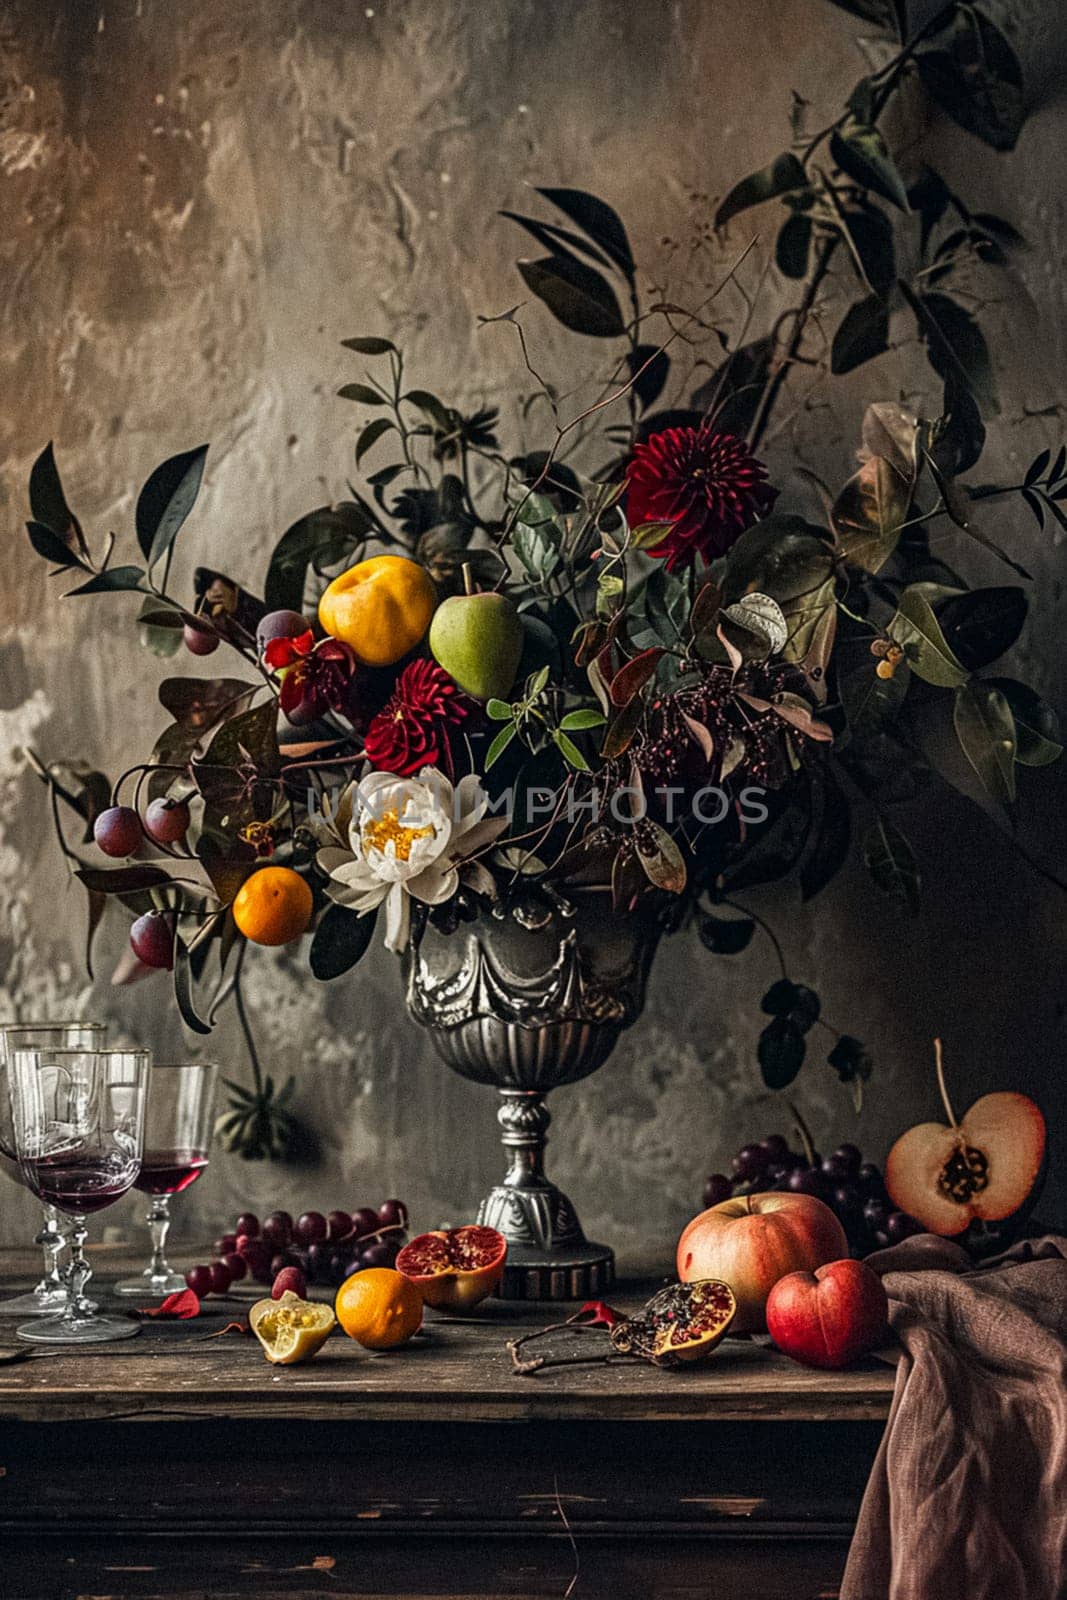 Classic floral still life fine art print, composition with rich arrangement of flowers and fresh fruits and a glass of wine, accented by lush vintage florals, English countryside art style by Anneleven